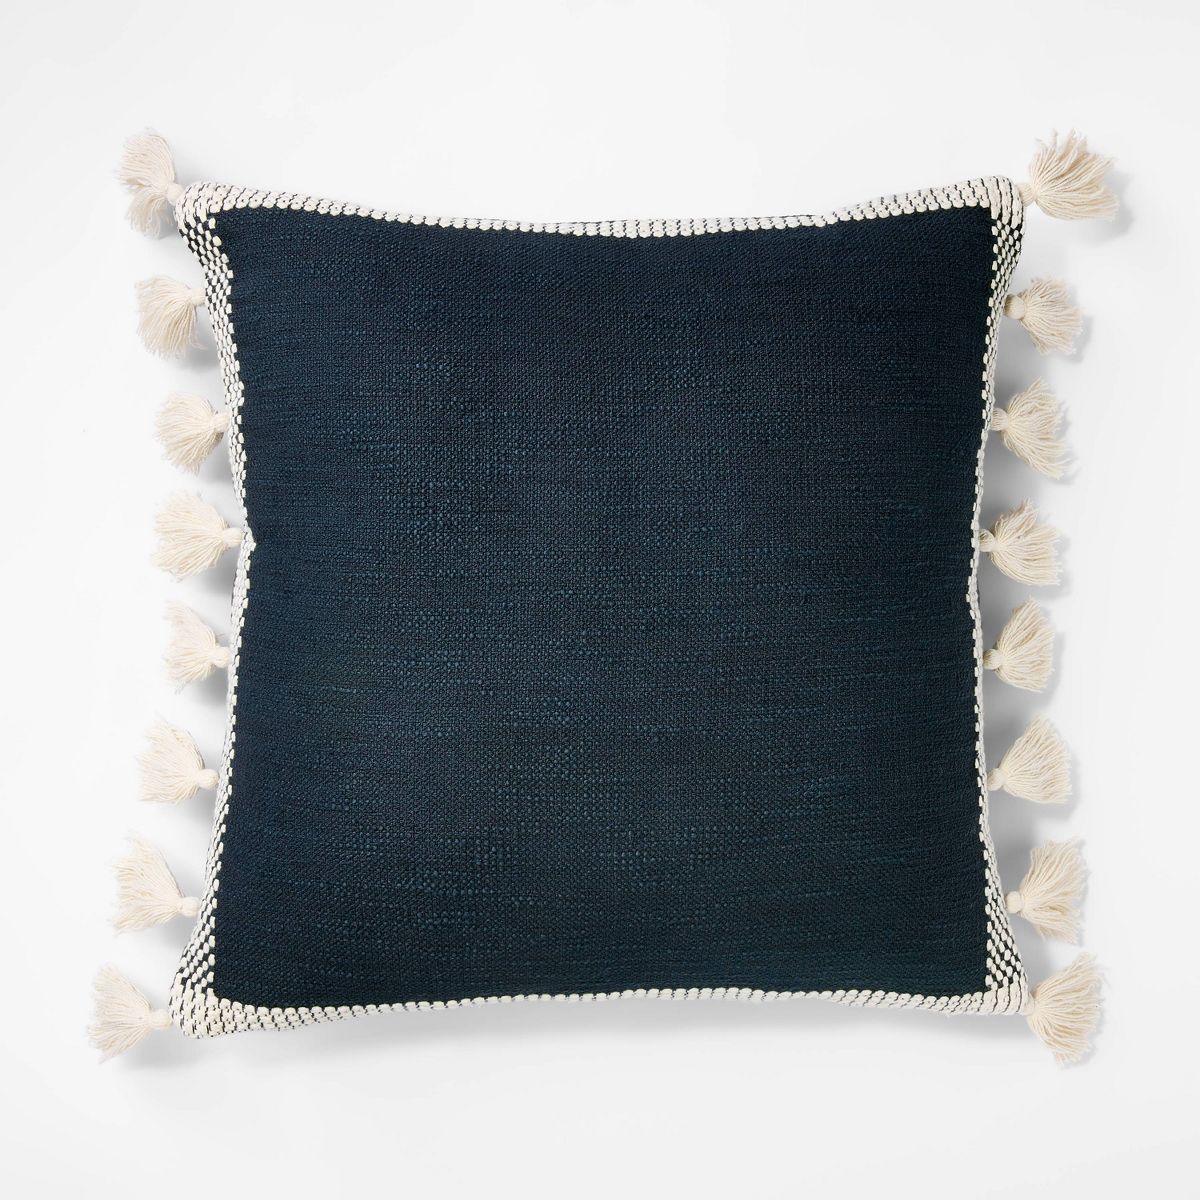 Woven Frame Square Throw Pillow with Side Tassels - Threshold™ designed with Studio McGee | Target